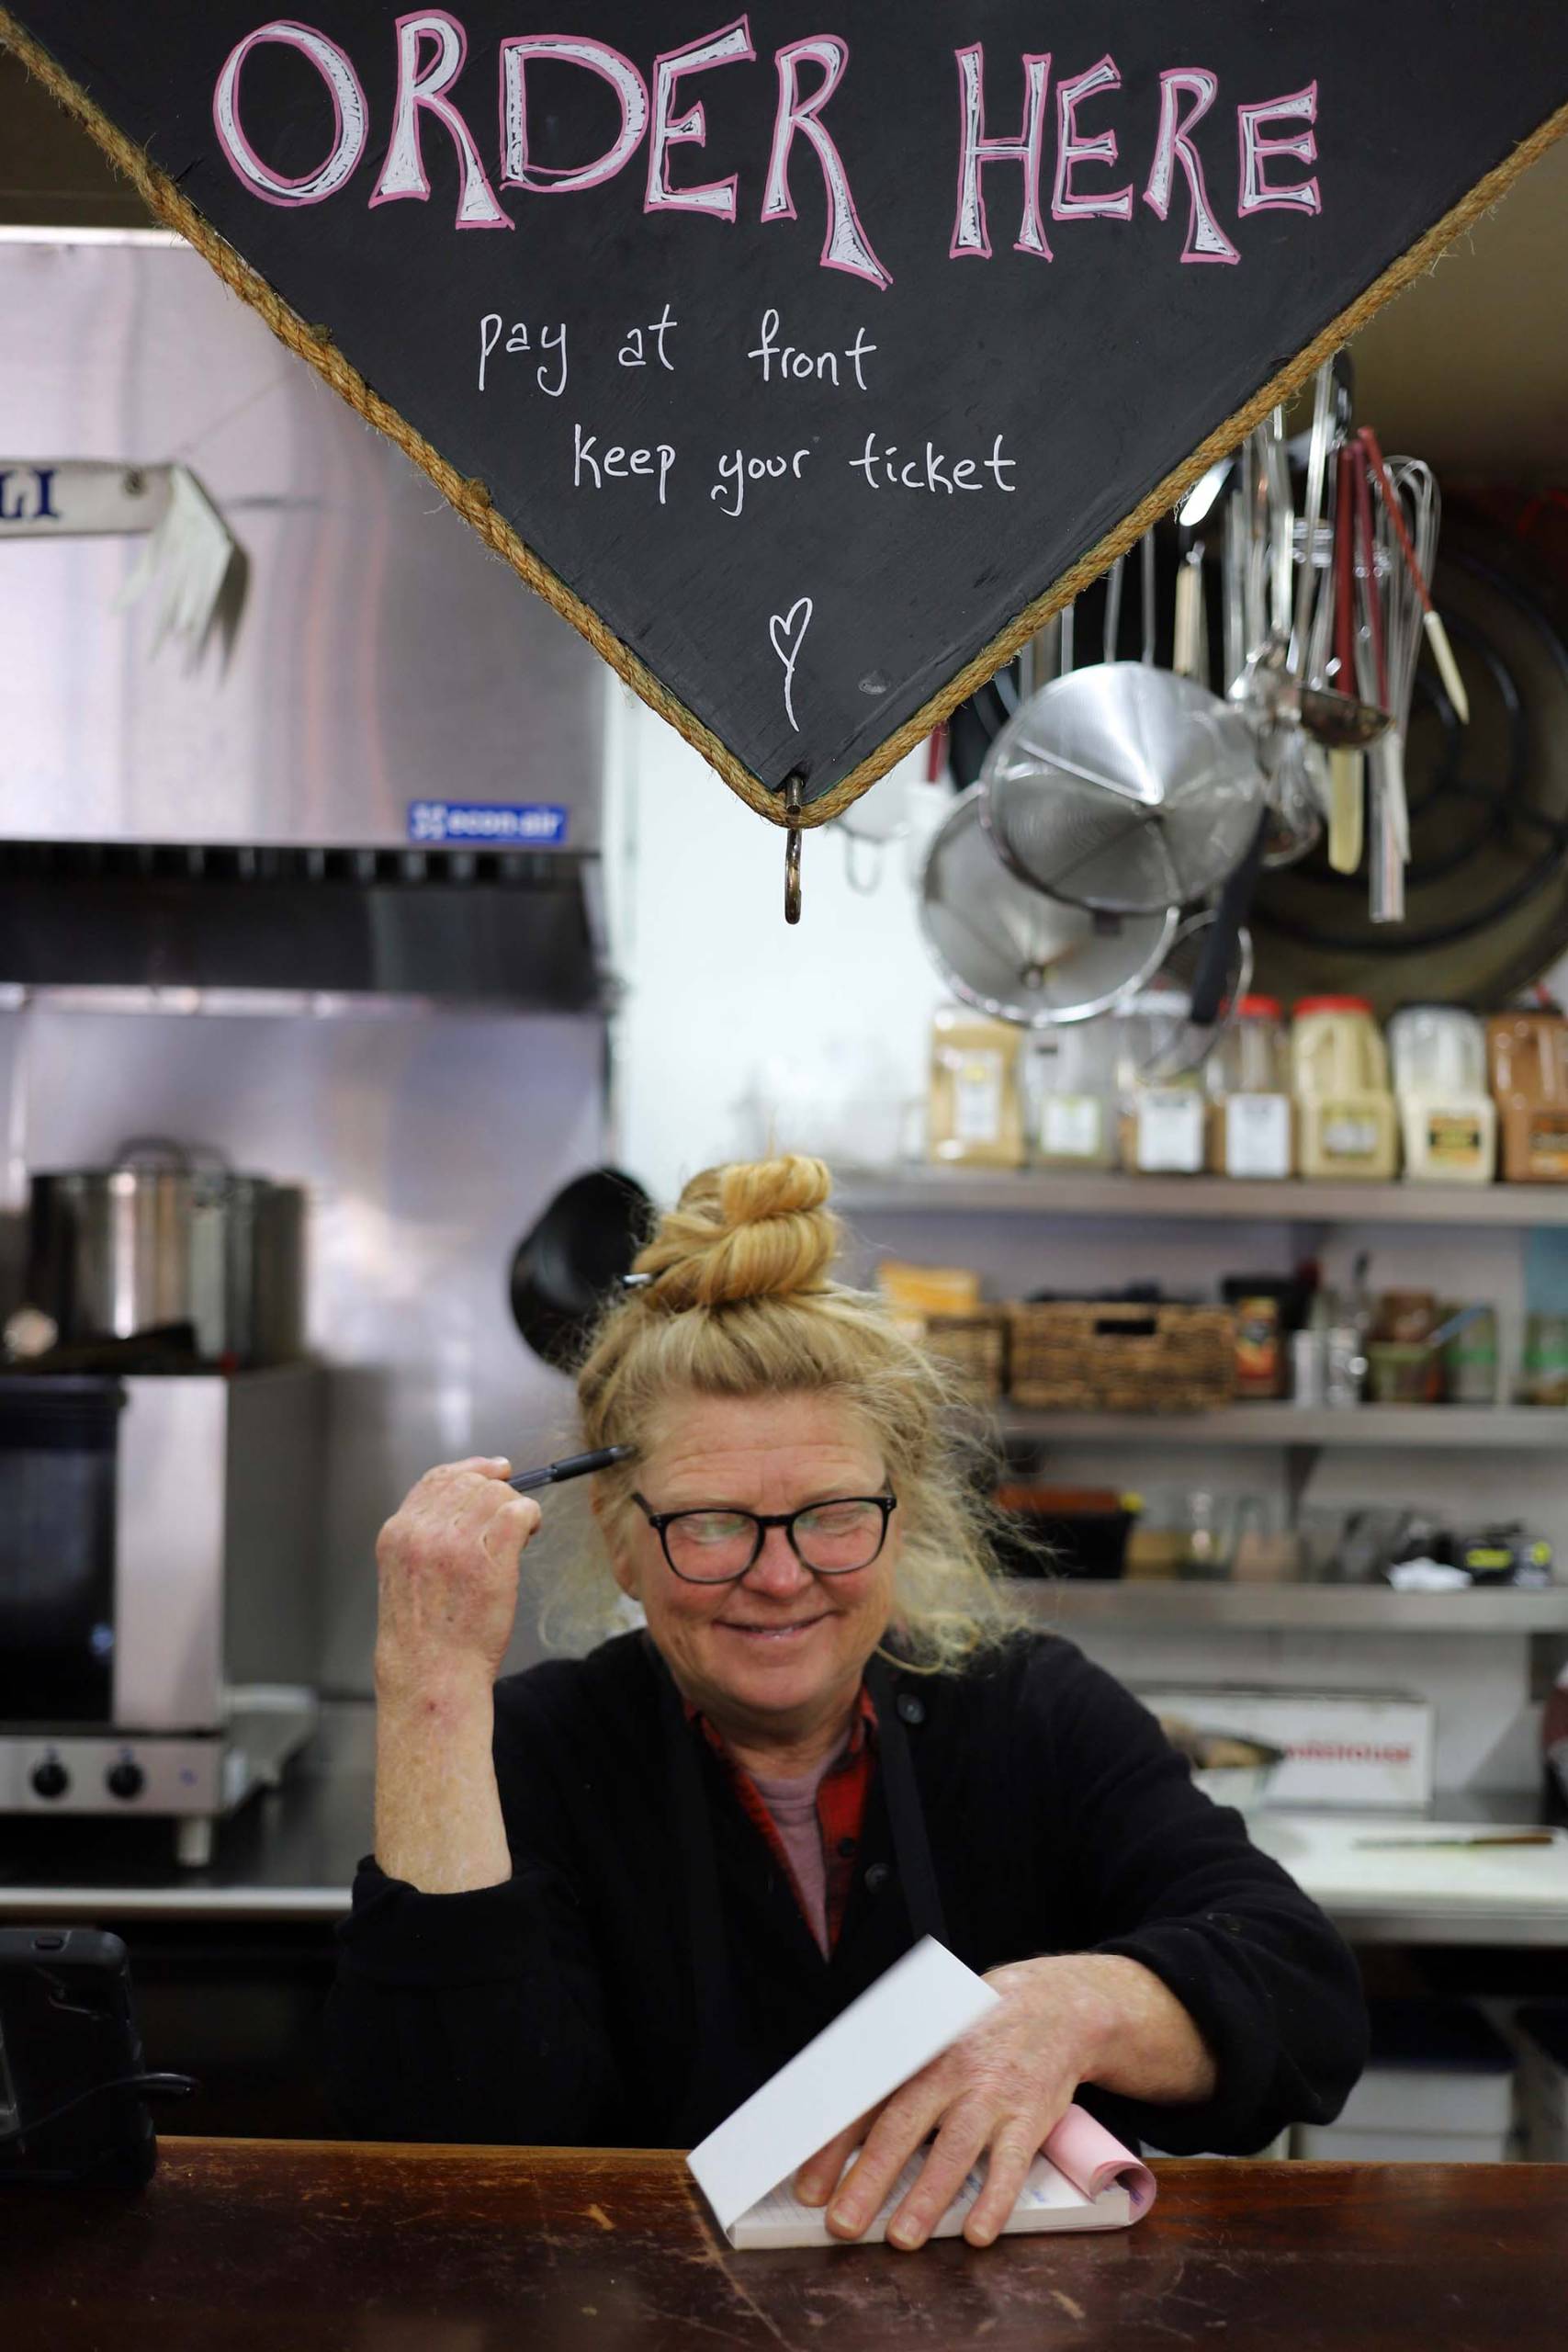 A middle-aged woman in glasses stands behind sa deli counter, her blonde hair tied in a bun.